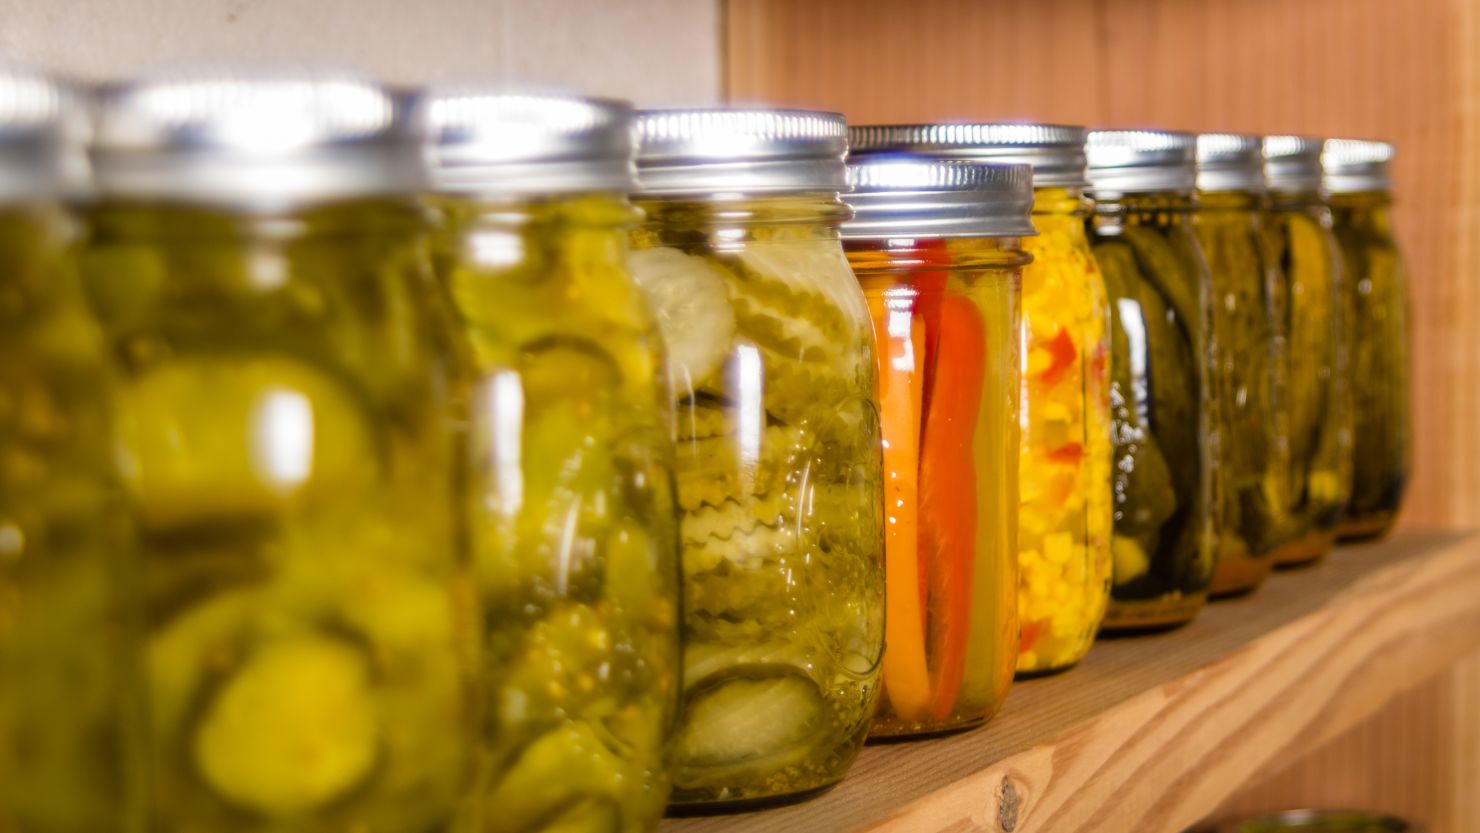 Mason jar shortage is because of more pandemic cooking and canning